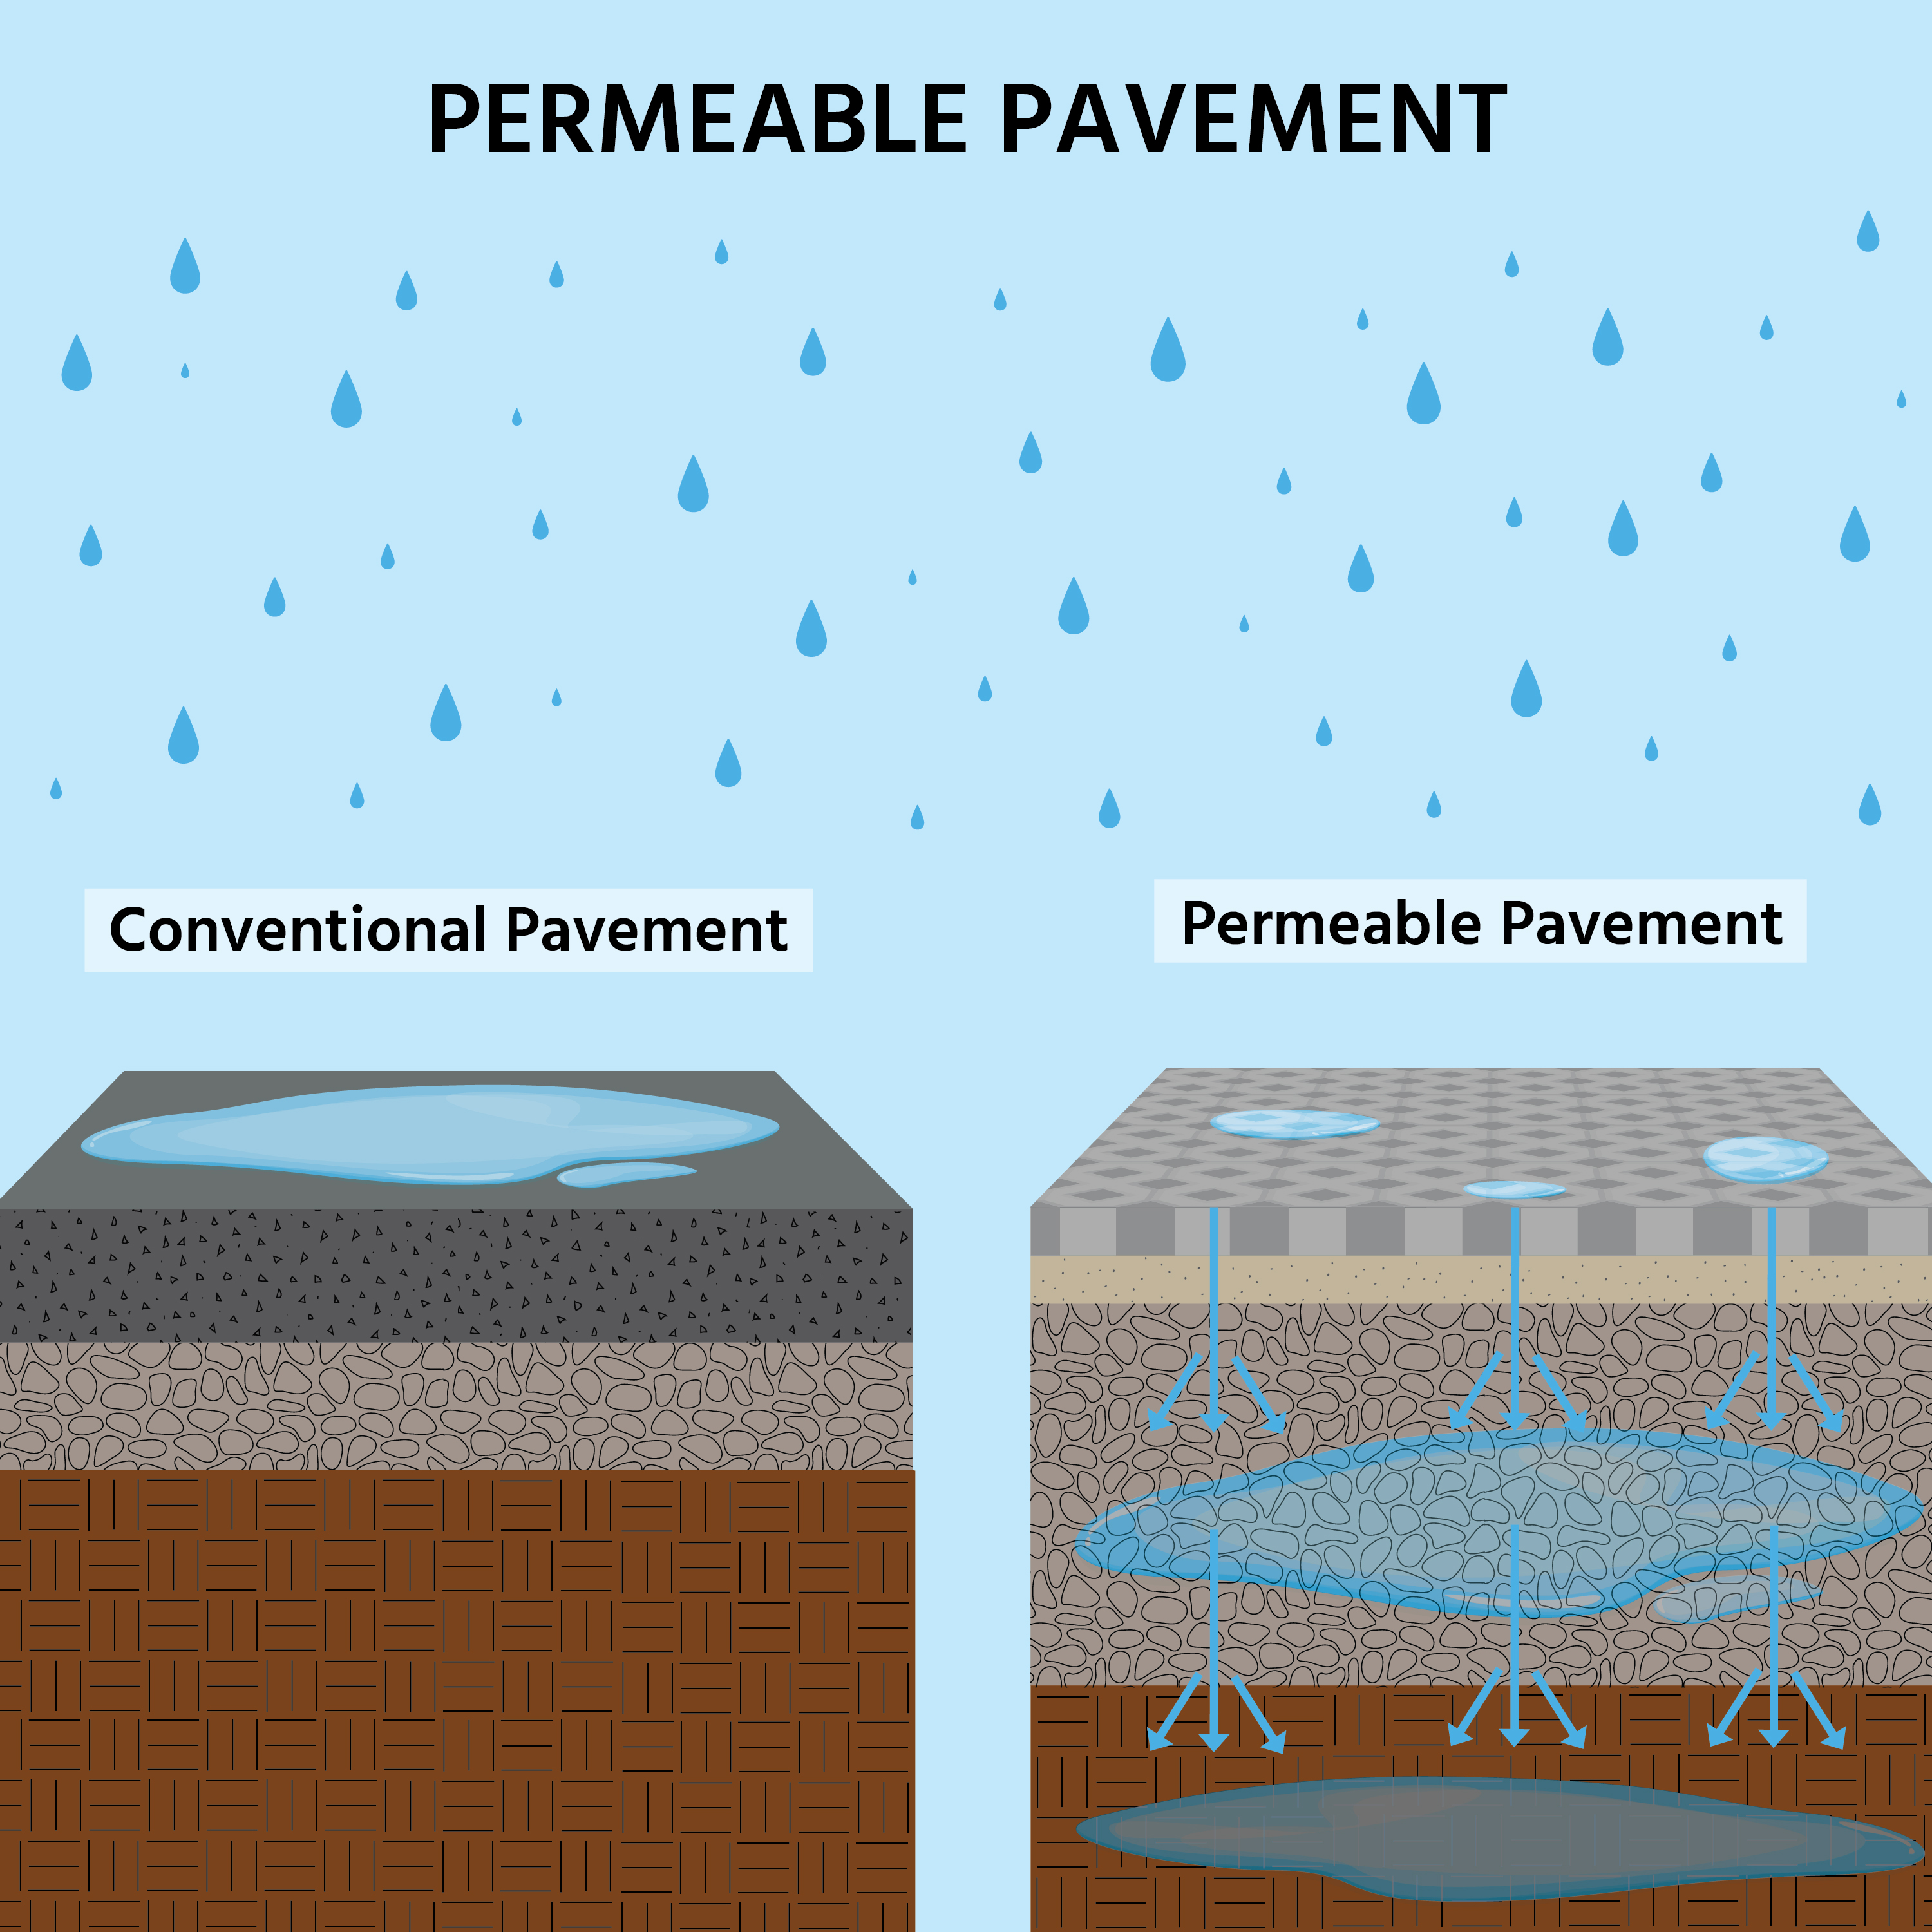 Education illustration of a segment of pavement showing convential pavement and permeable pavement side by side in rainy conditions